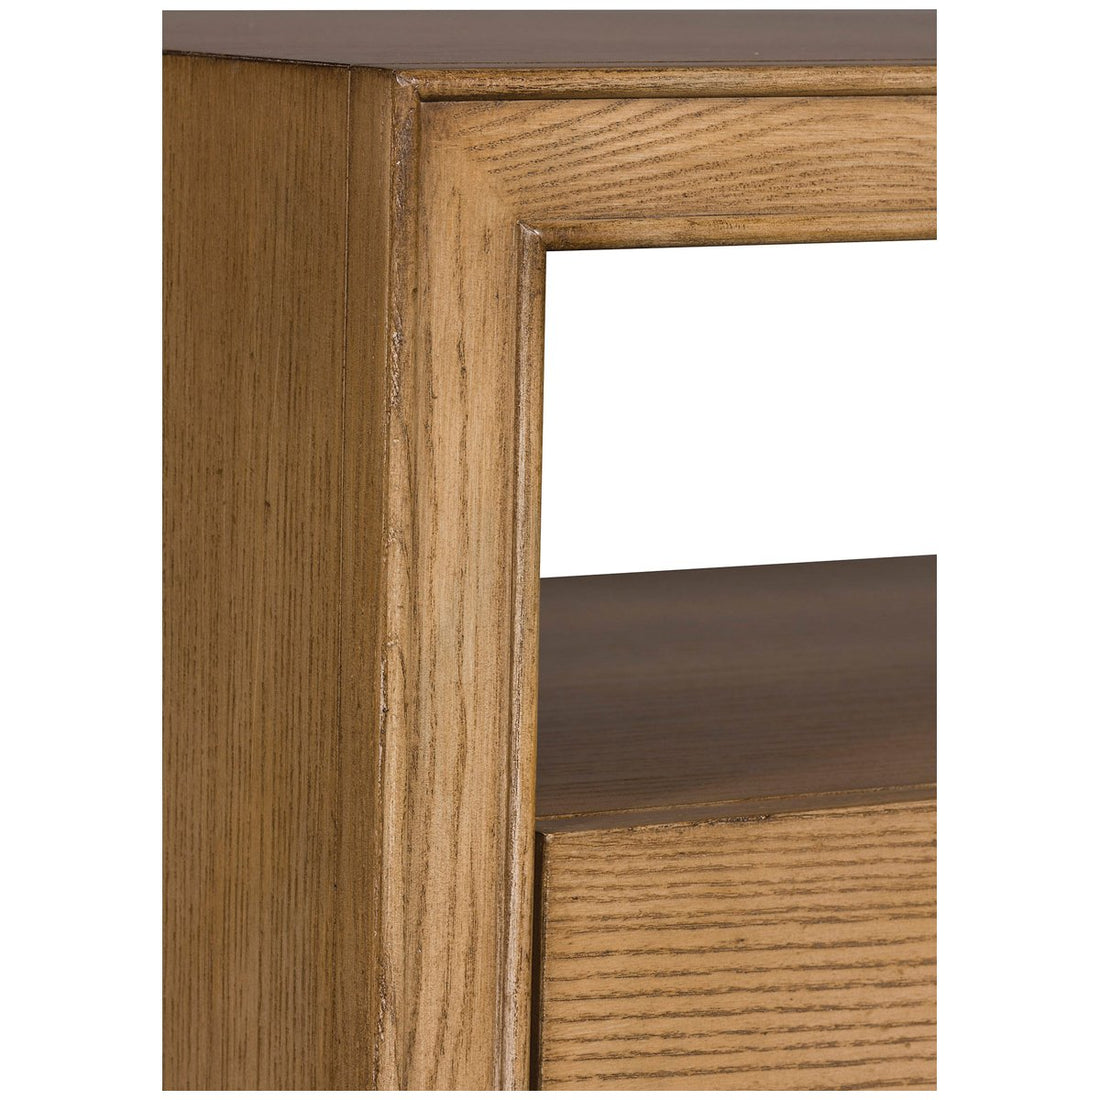 Vanguard Furniture Axis End Table